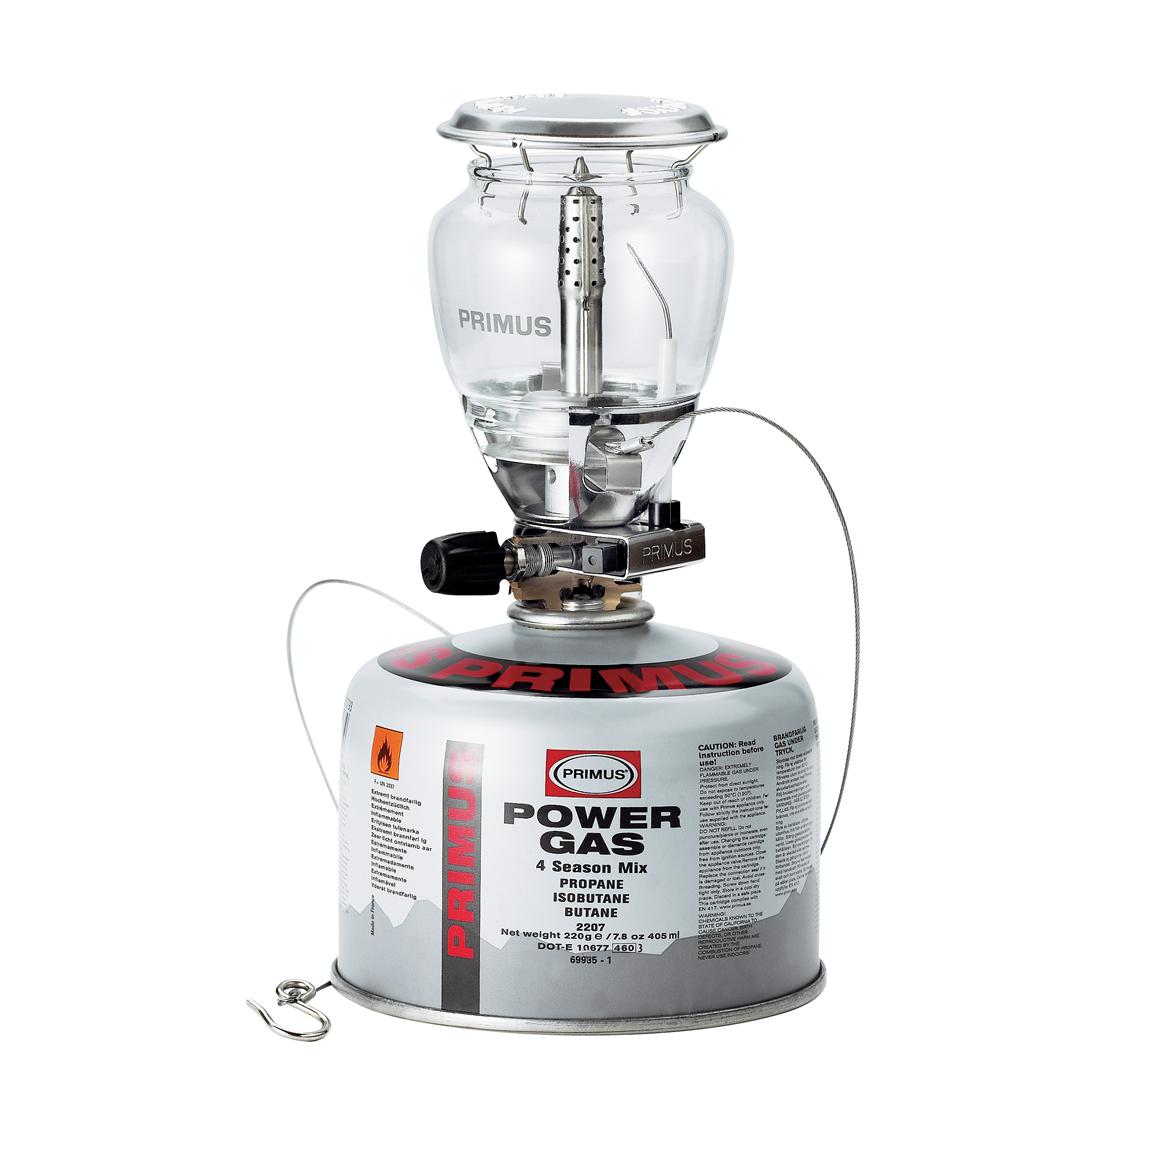 Primus® EasyLight™ Lantern - 137619, Stoves at Sportsman's Guide